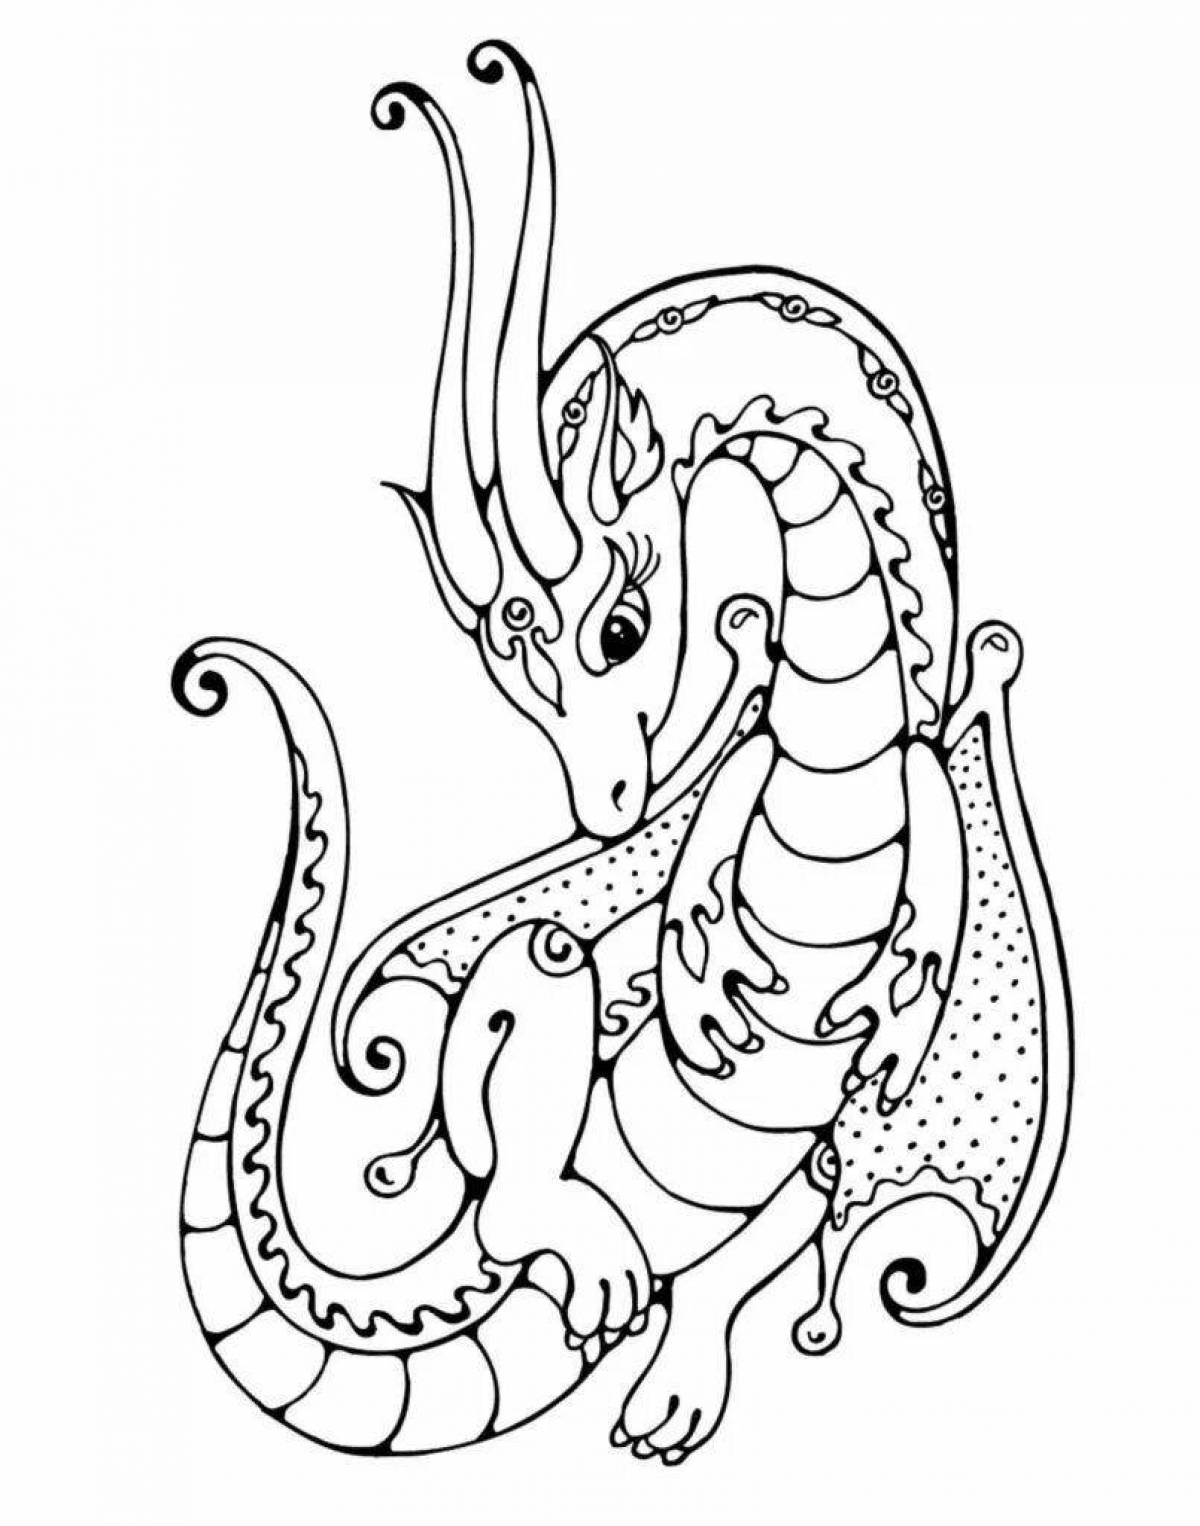 Great dragon coloring book for kids 6-7 years old